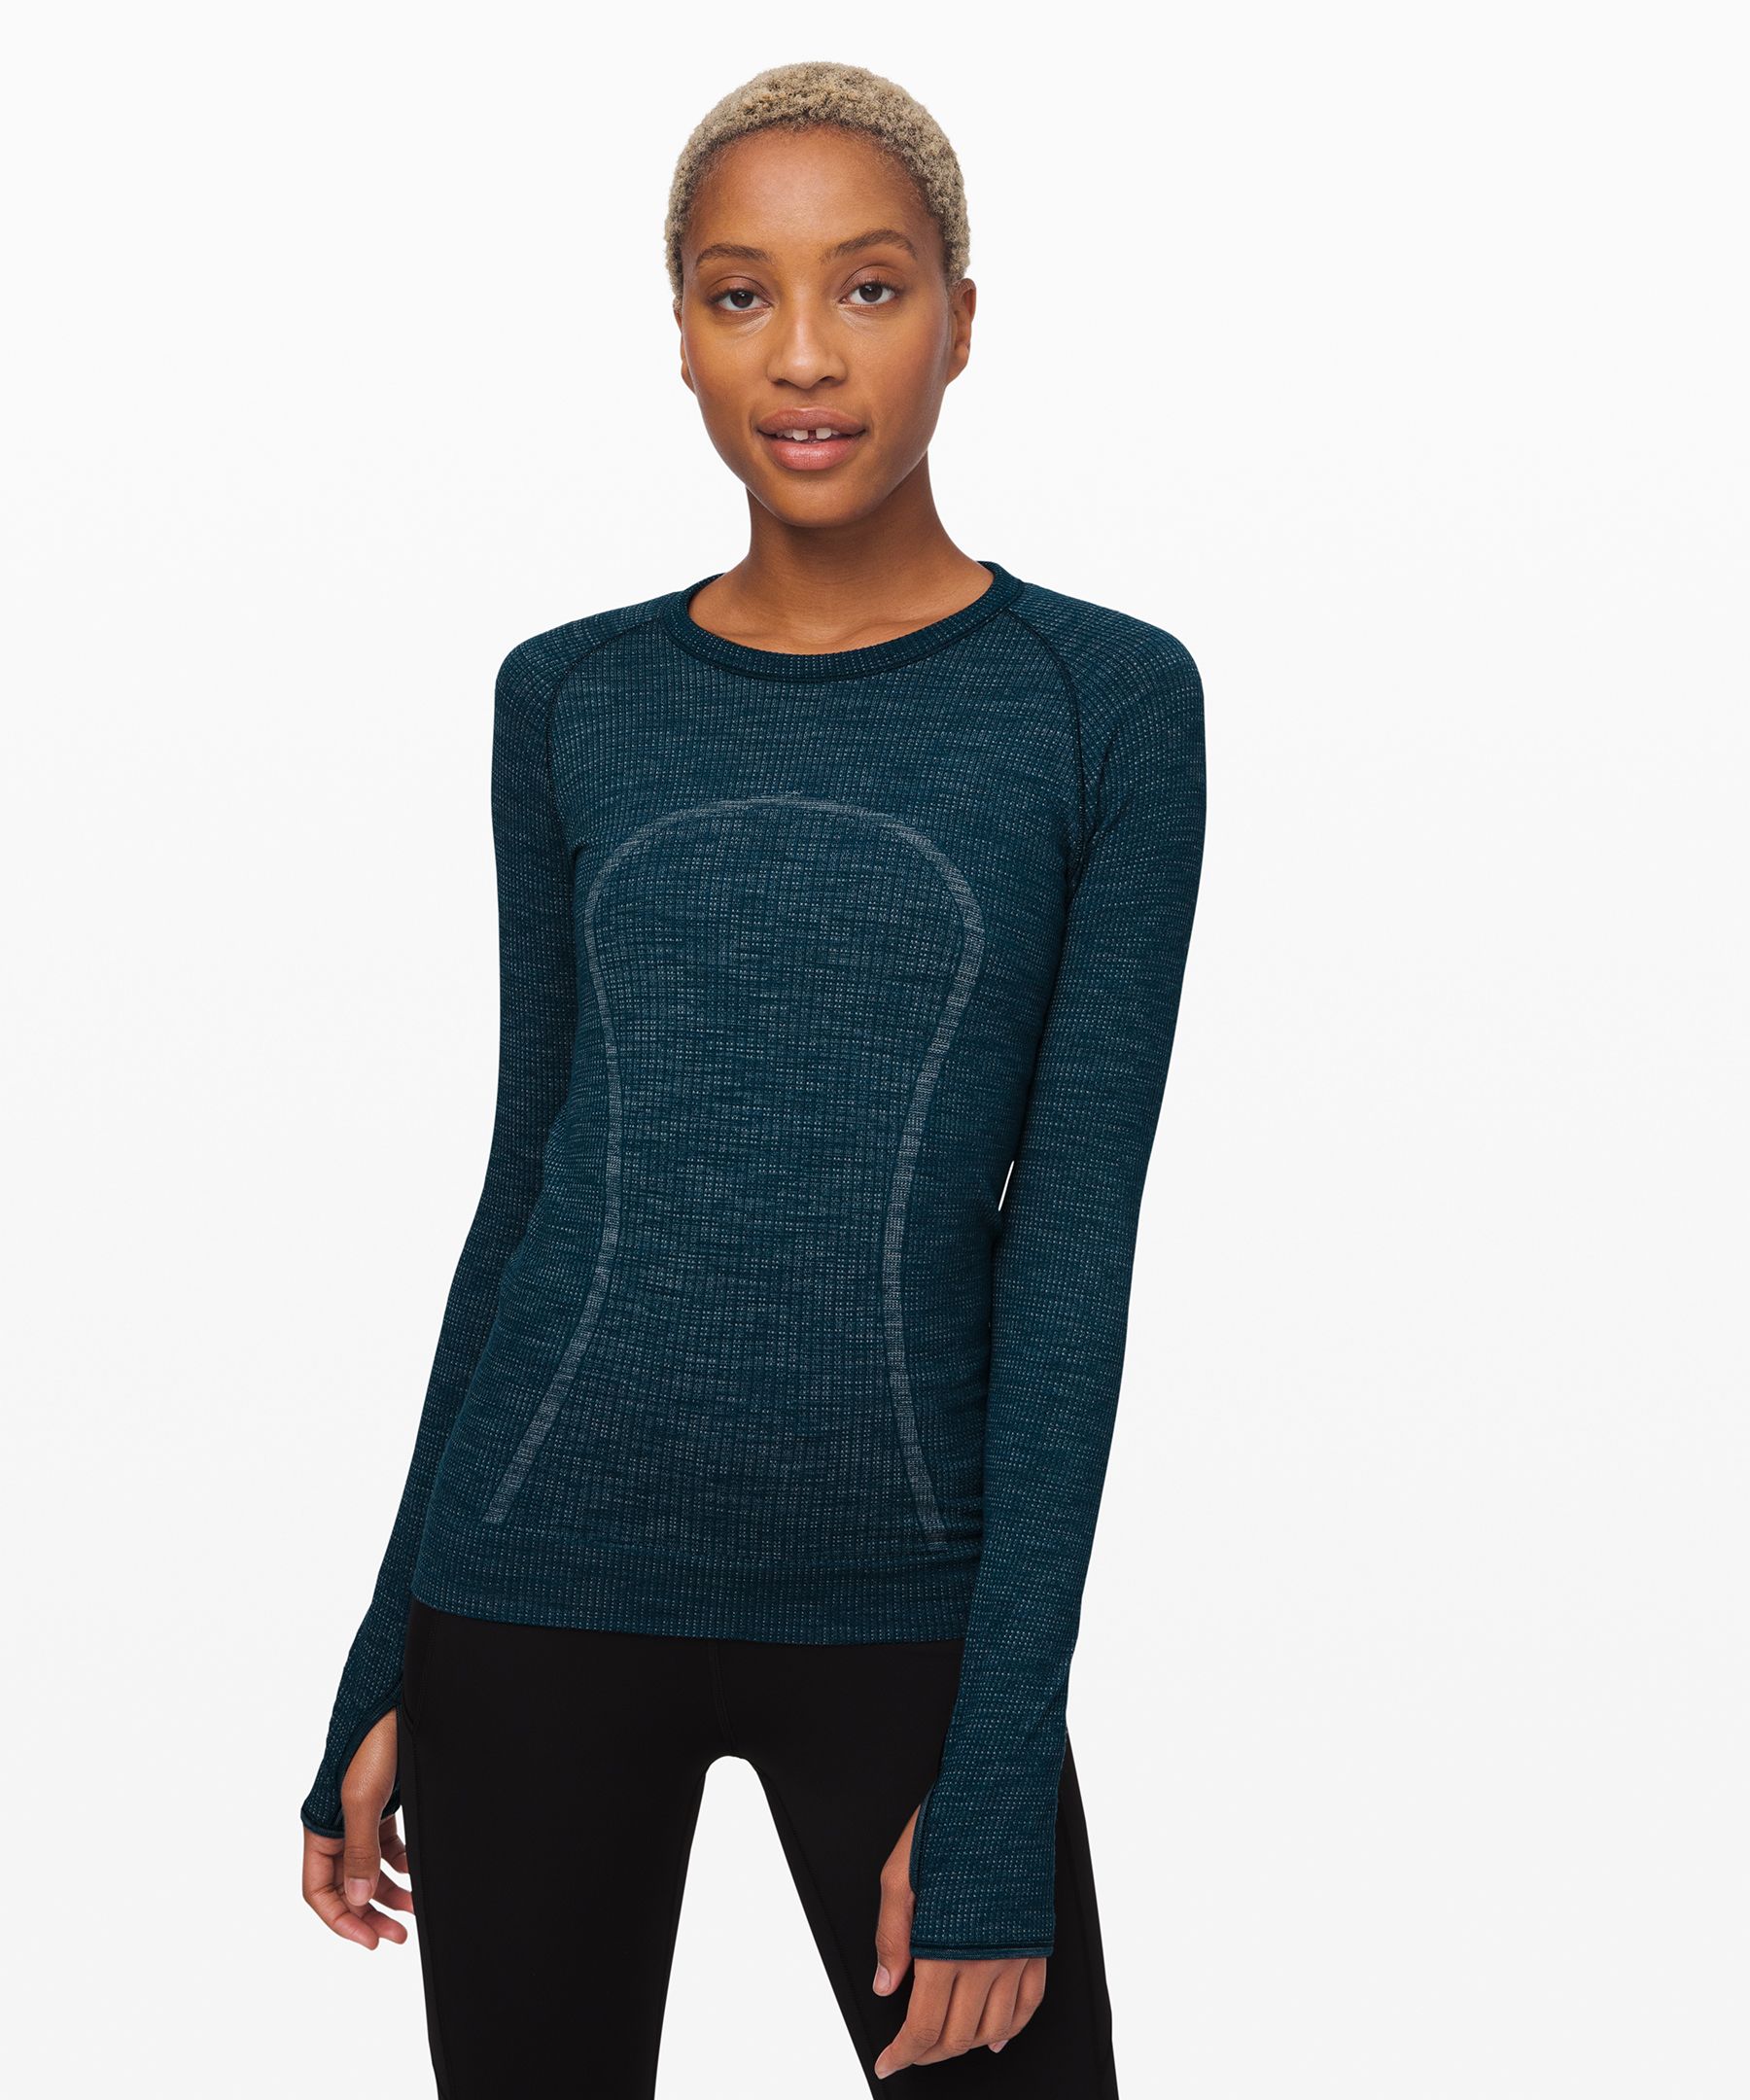 Swiftly Wool Pullover | Long Sleeves 